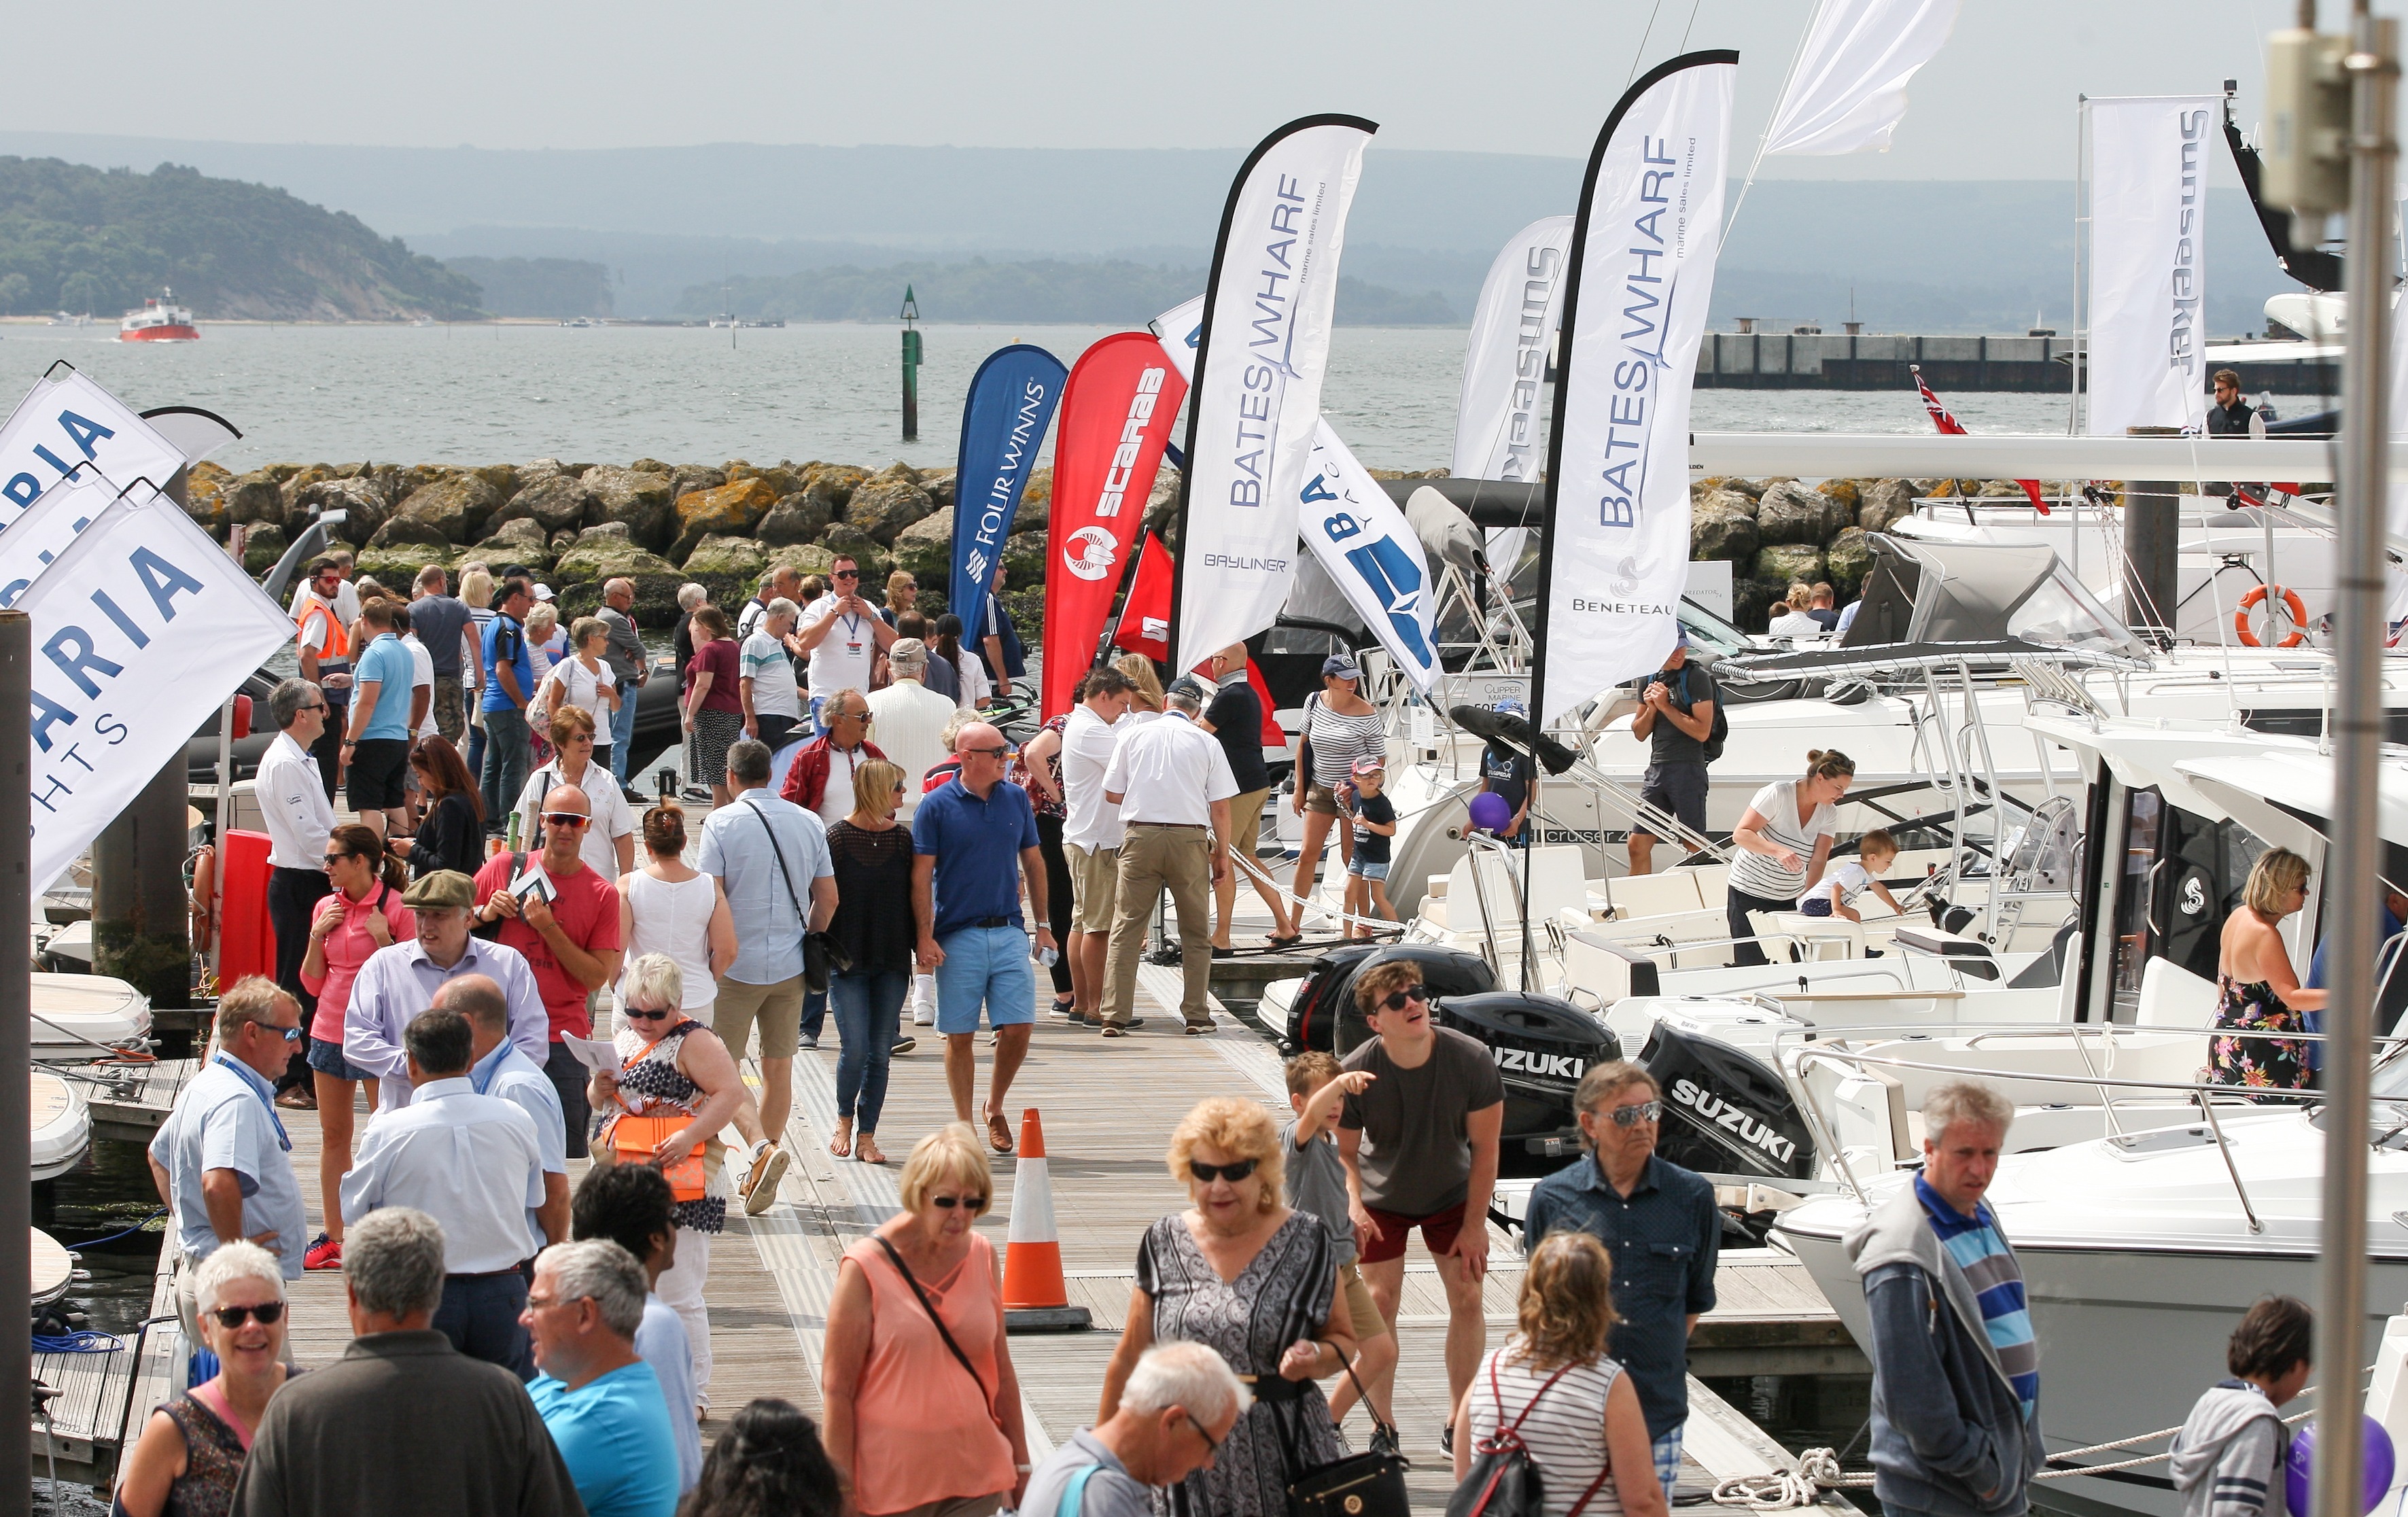 Marina exhibitor spaces sell out for the 2019 Poole Harbour Boat Show!